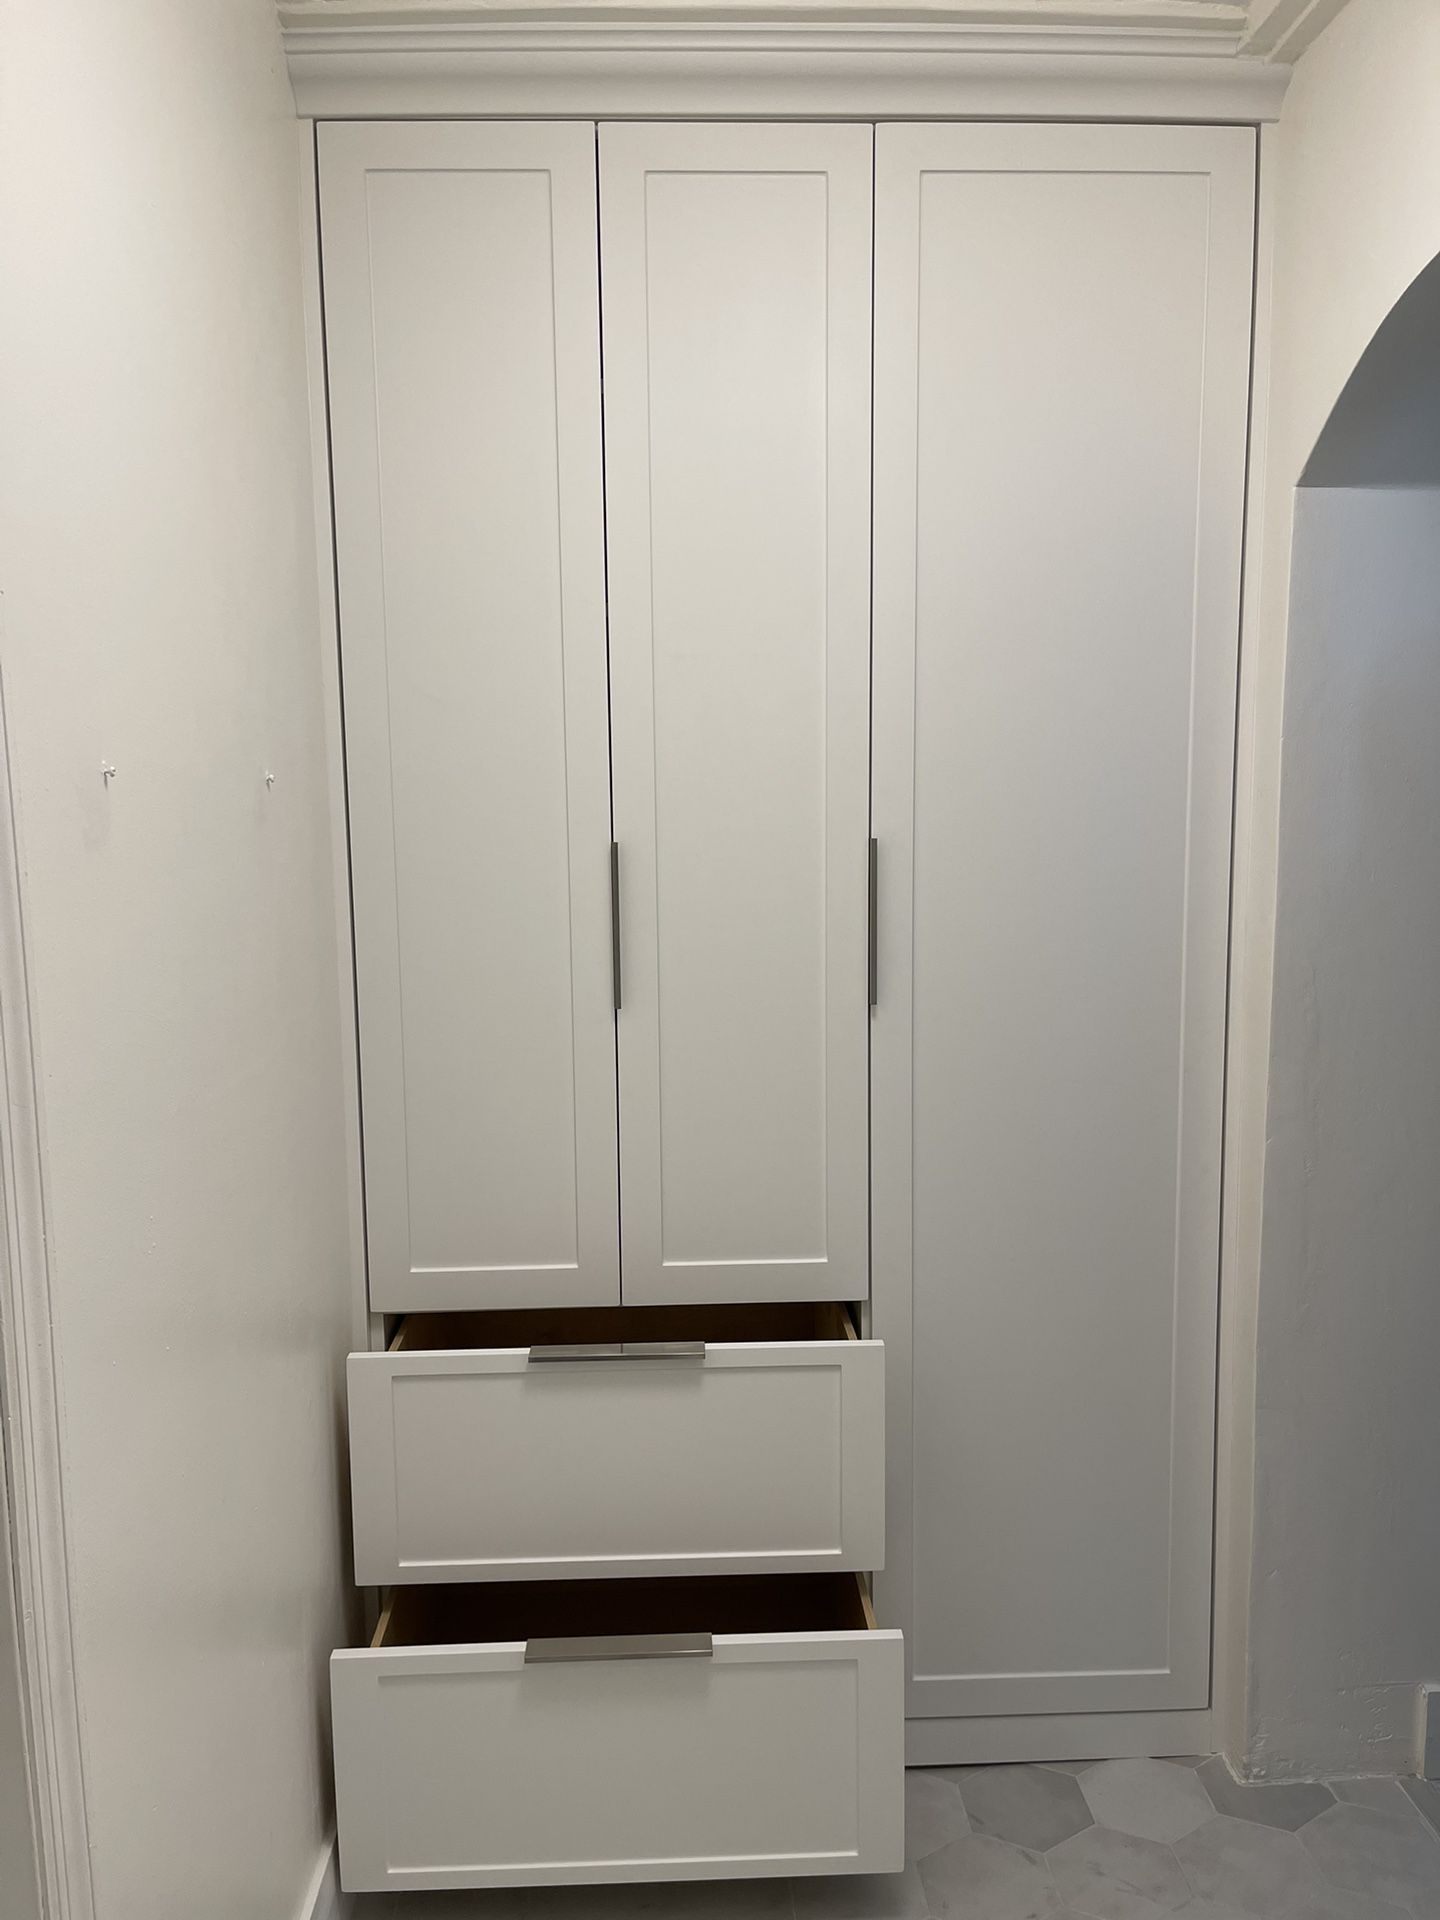 New Cabinet And Shelves For Sale 